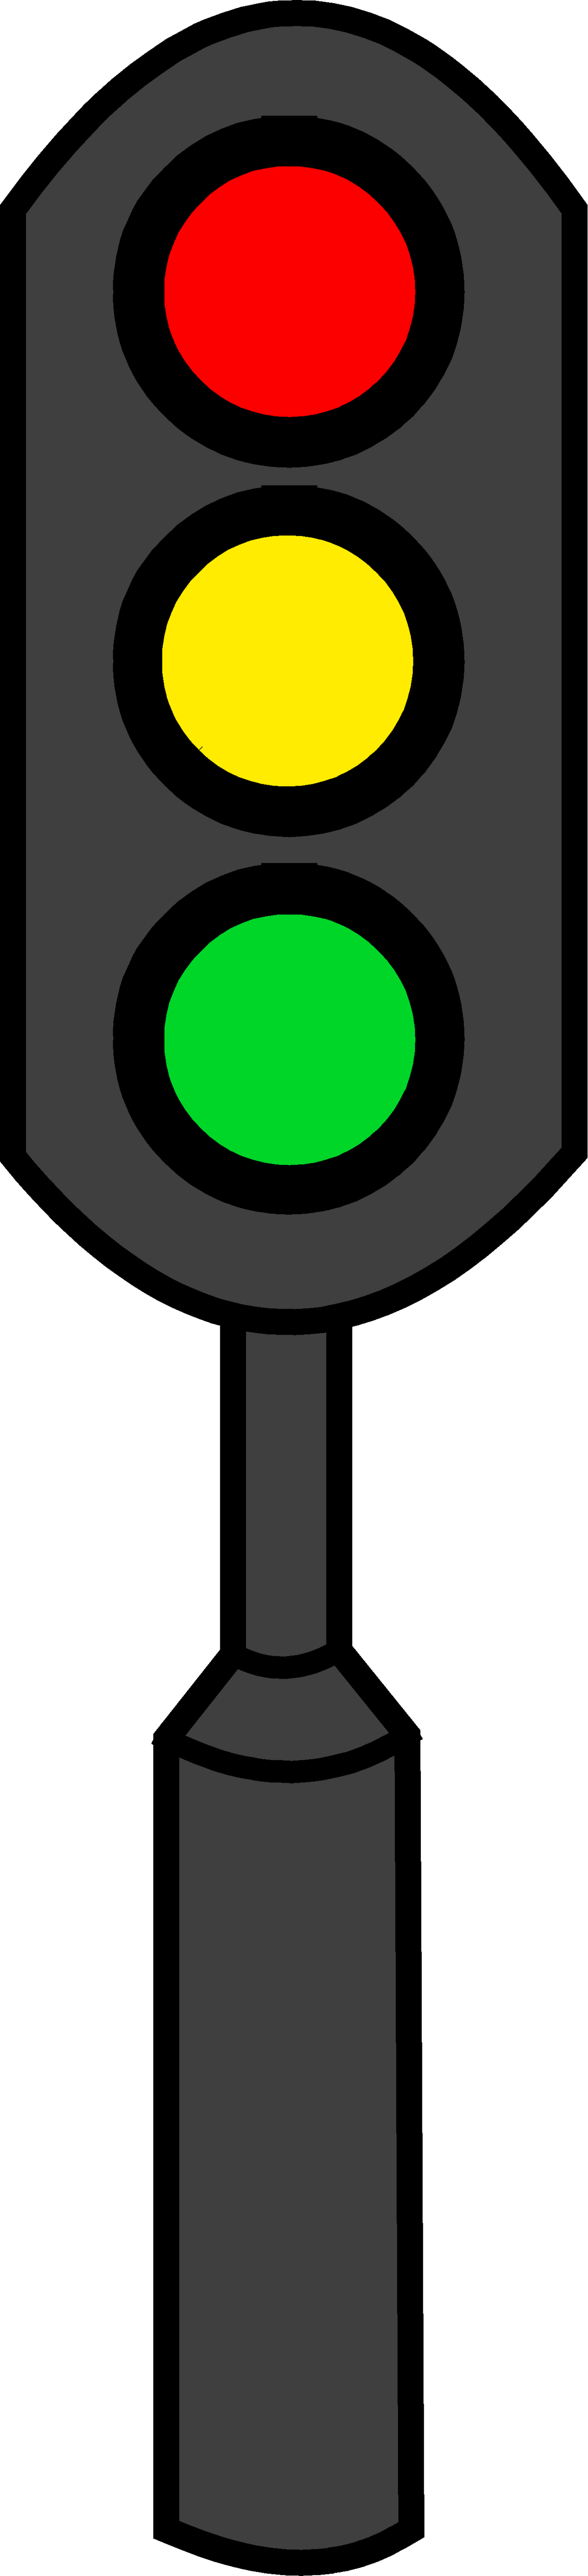 Traffic Light Clipart Black And White Clipart Free To Use Clip